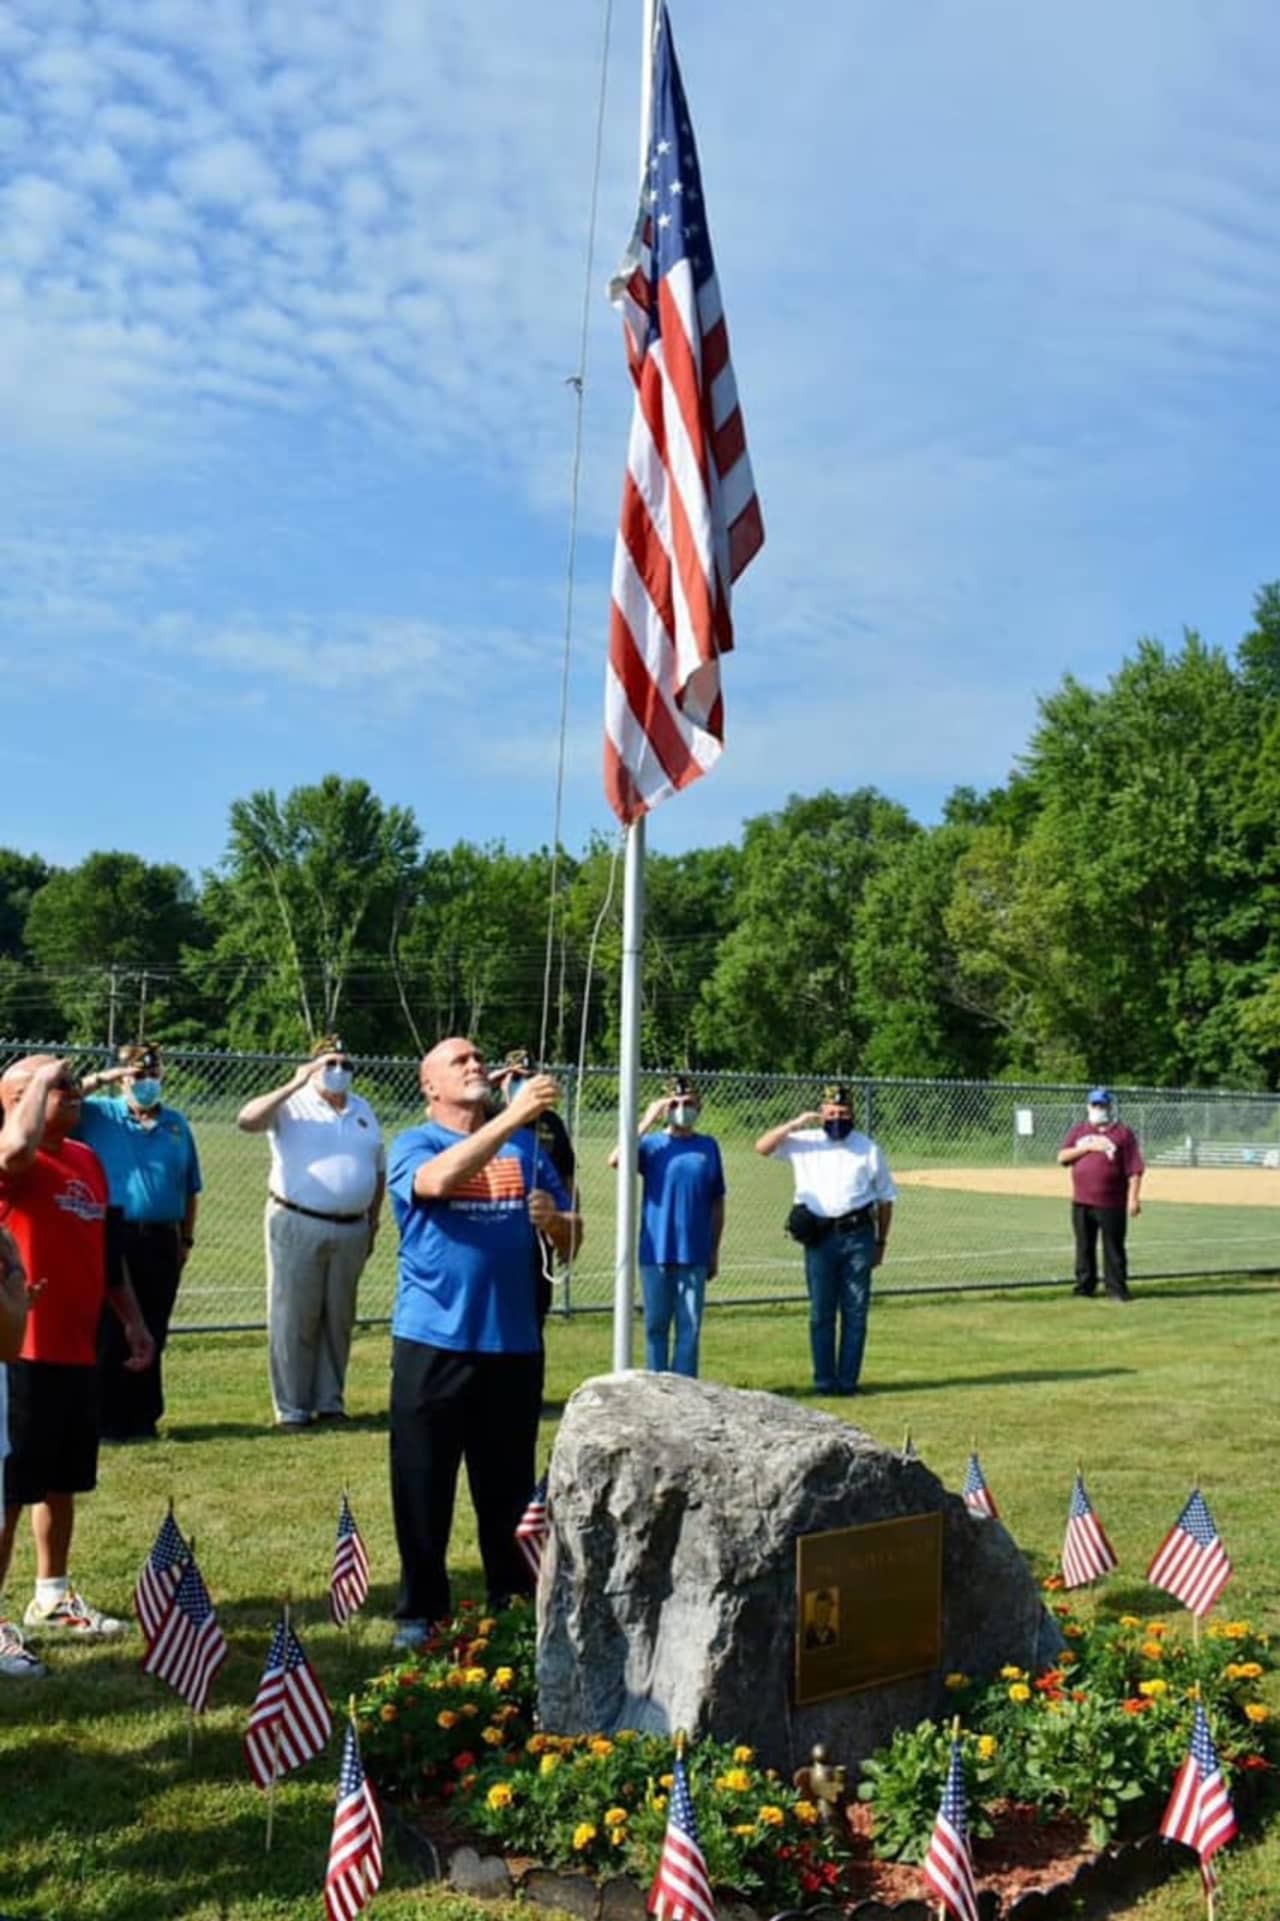 The American Flag that was desecrated in the Town of Poughkeepsie has been replaced.